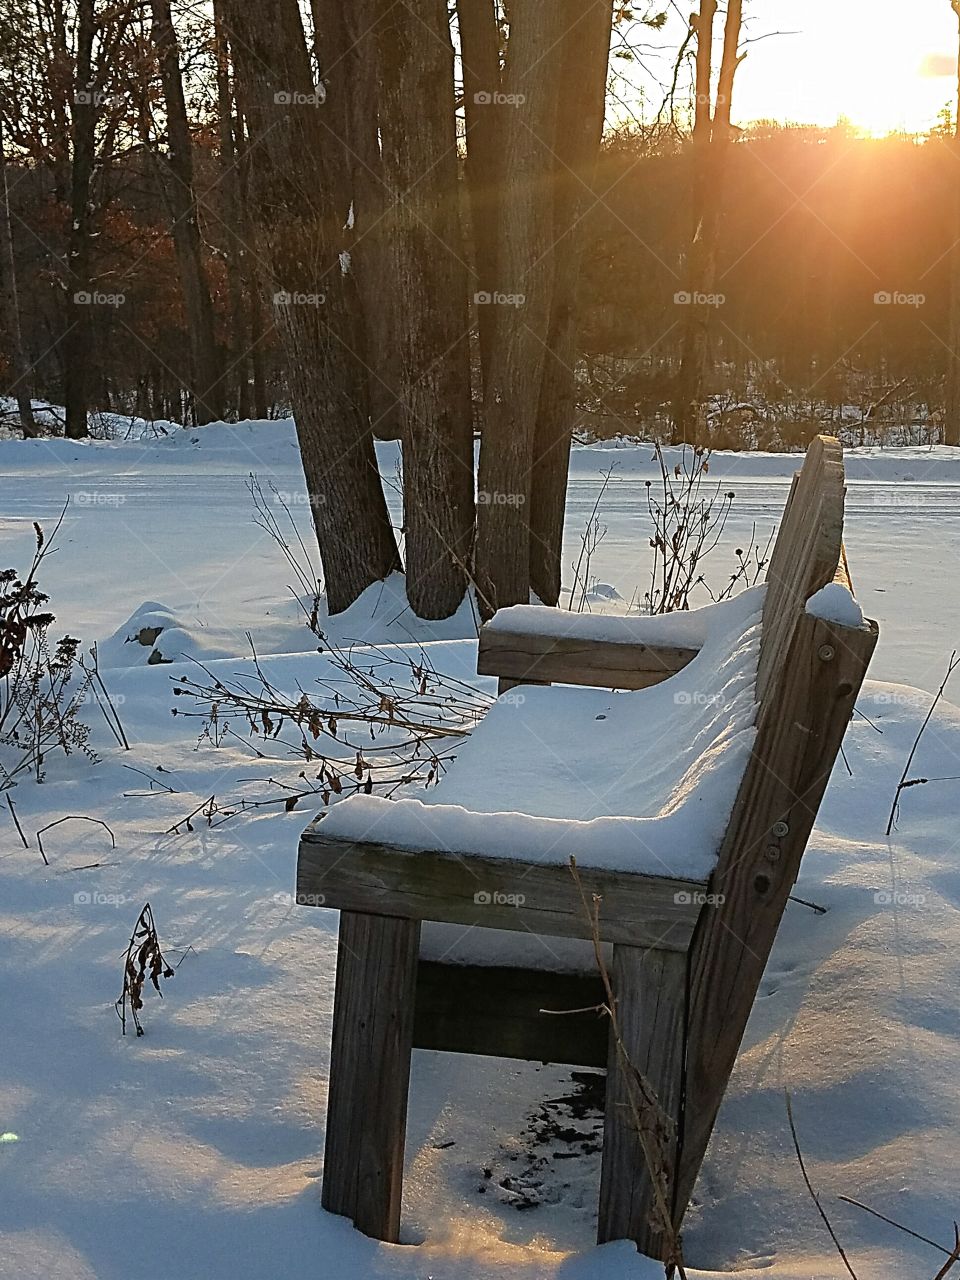 snow on a wood bench at sunset